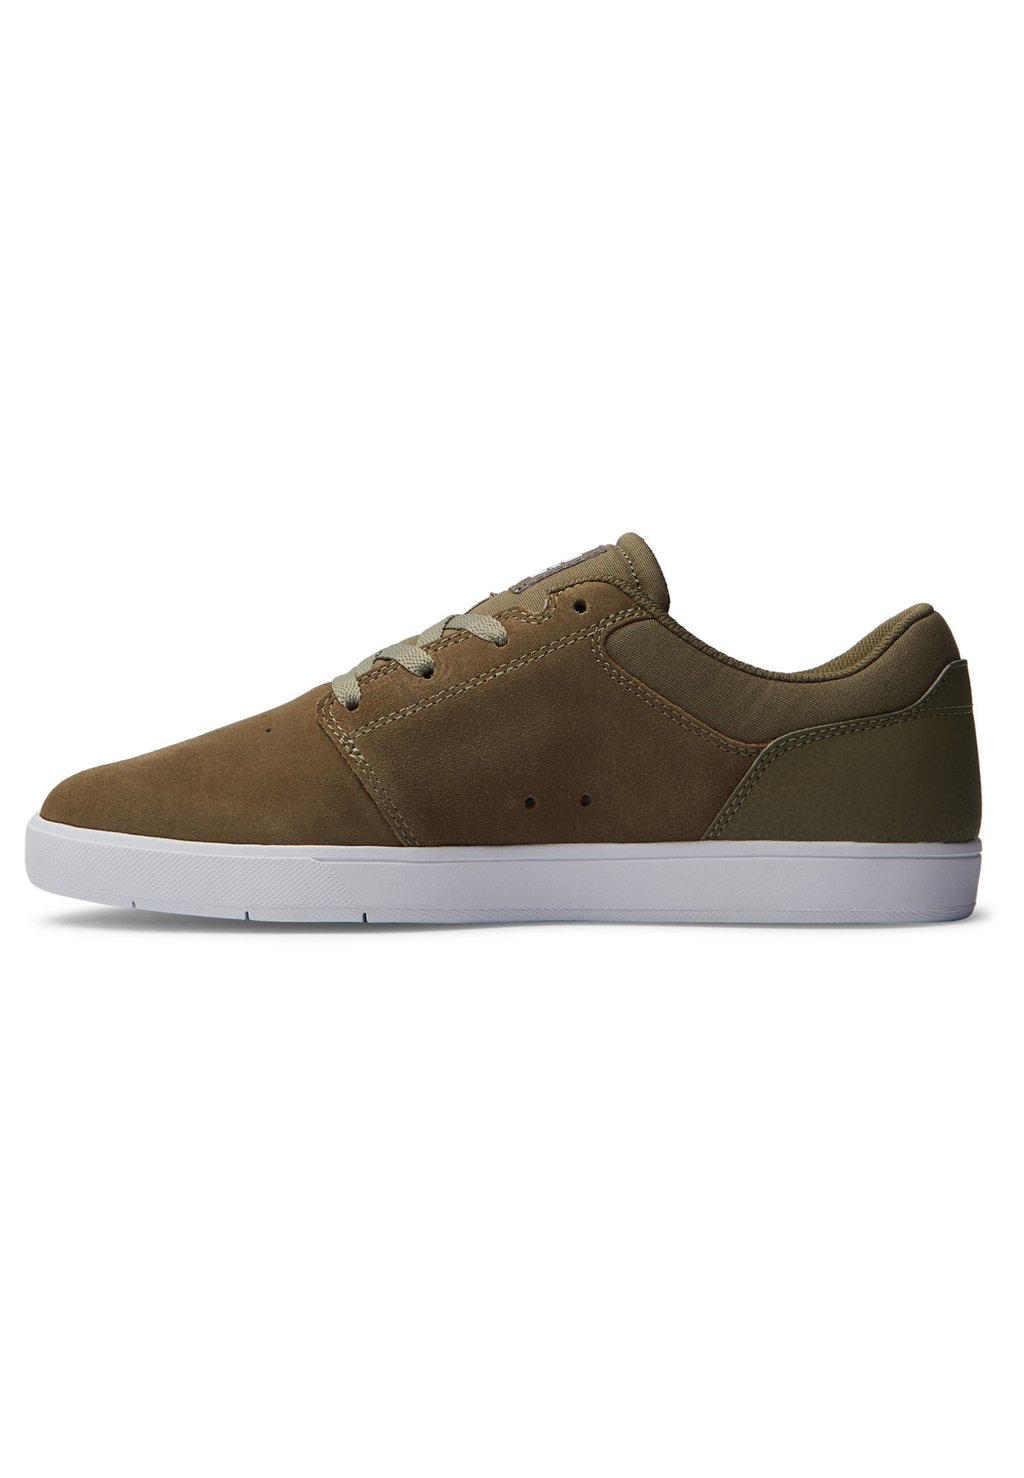 Кроссовки низкие CRISIS DC Shoes, цвет owh olive white кроссовки dc shoes trase tx olive white